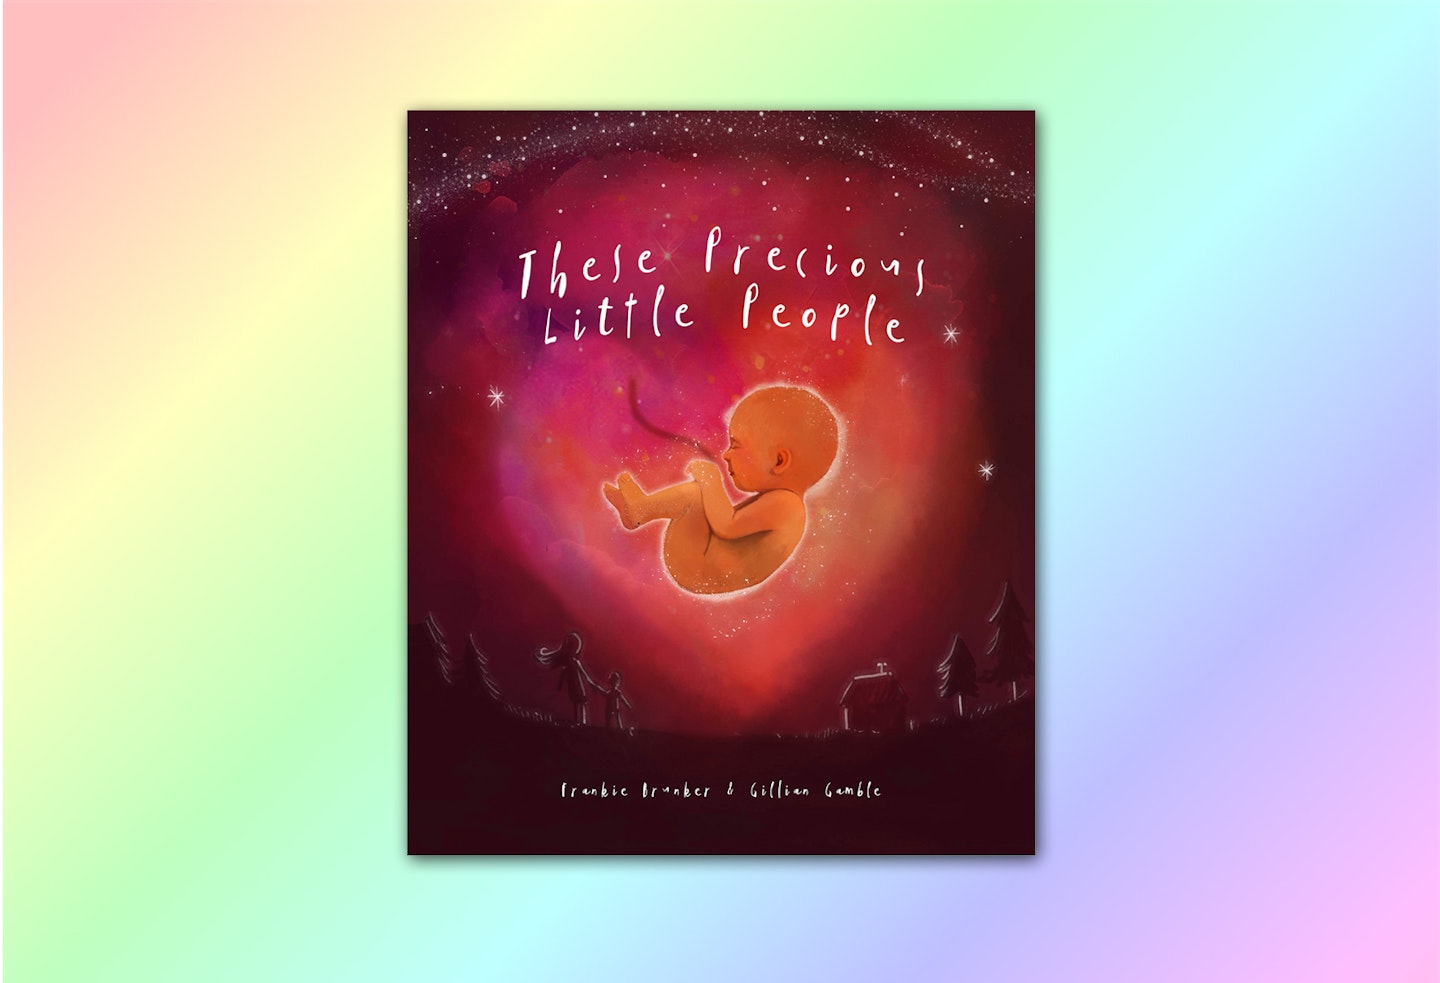 The invaluable book explaining infant death or stillbirth to young siblings